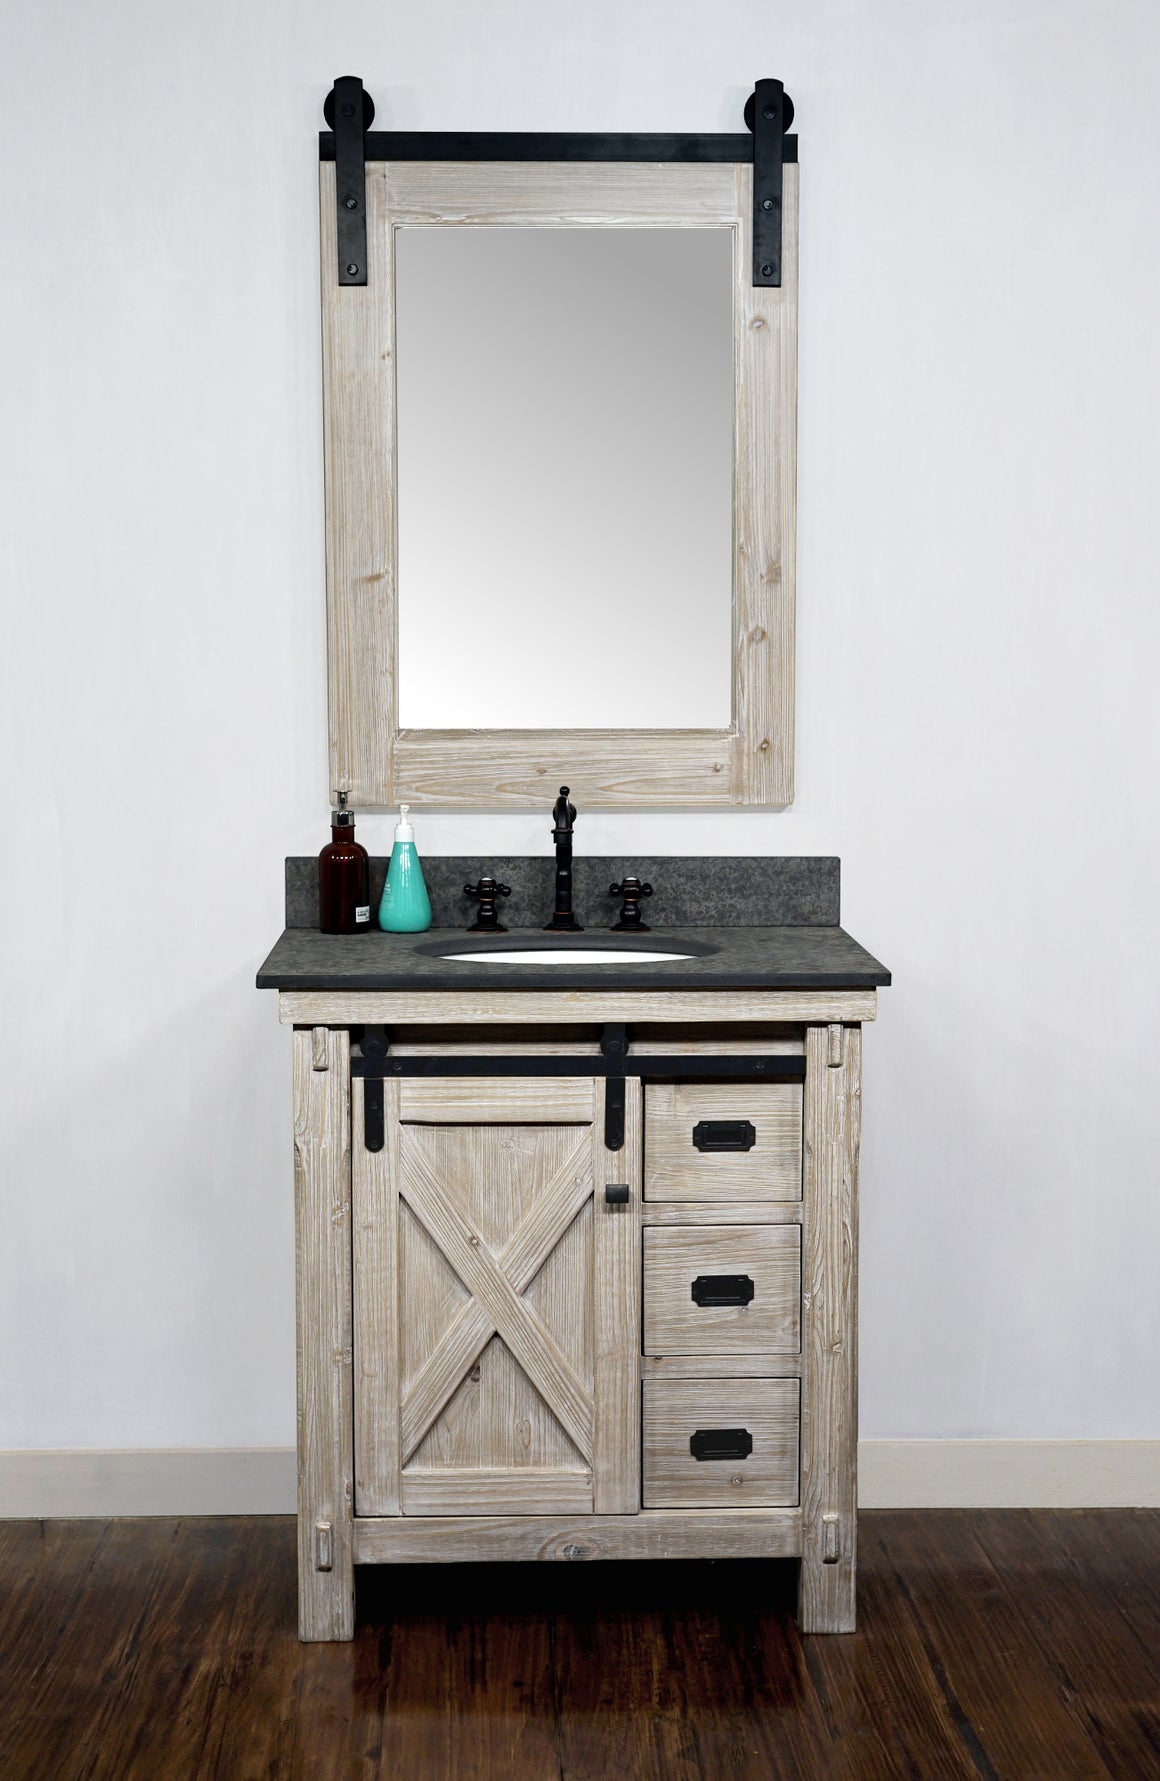 30"RUSTIC SOLID FIR BARN DOOR STYLE SINGLE SINK VANITY WITH RUSTIC STYLE POLISHED TEXTURED SURFACE GRANITE TOP IN MATTE GREY-NO FAUCET